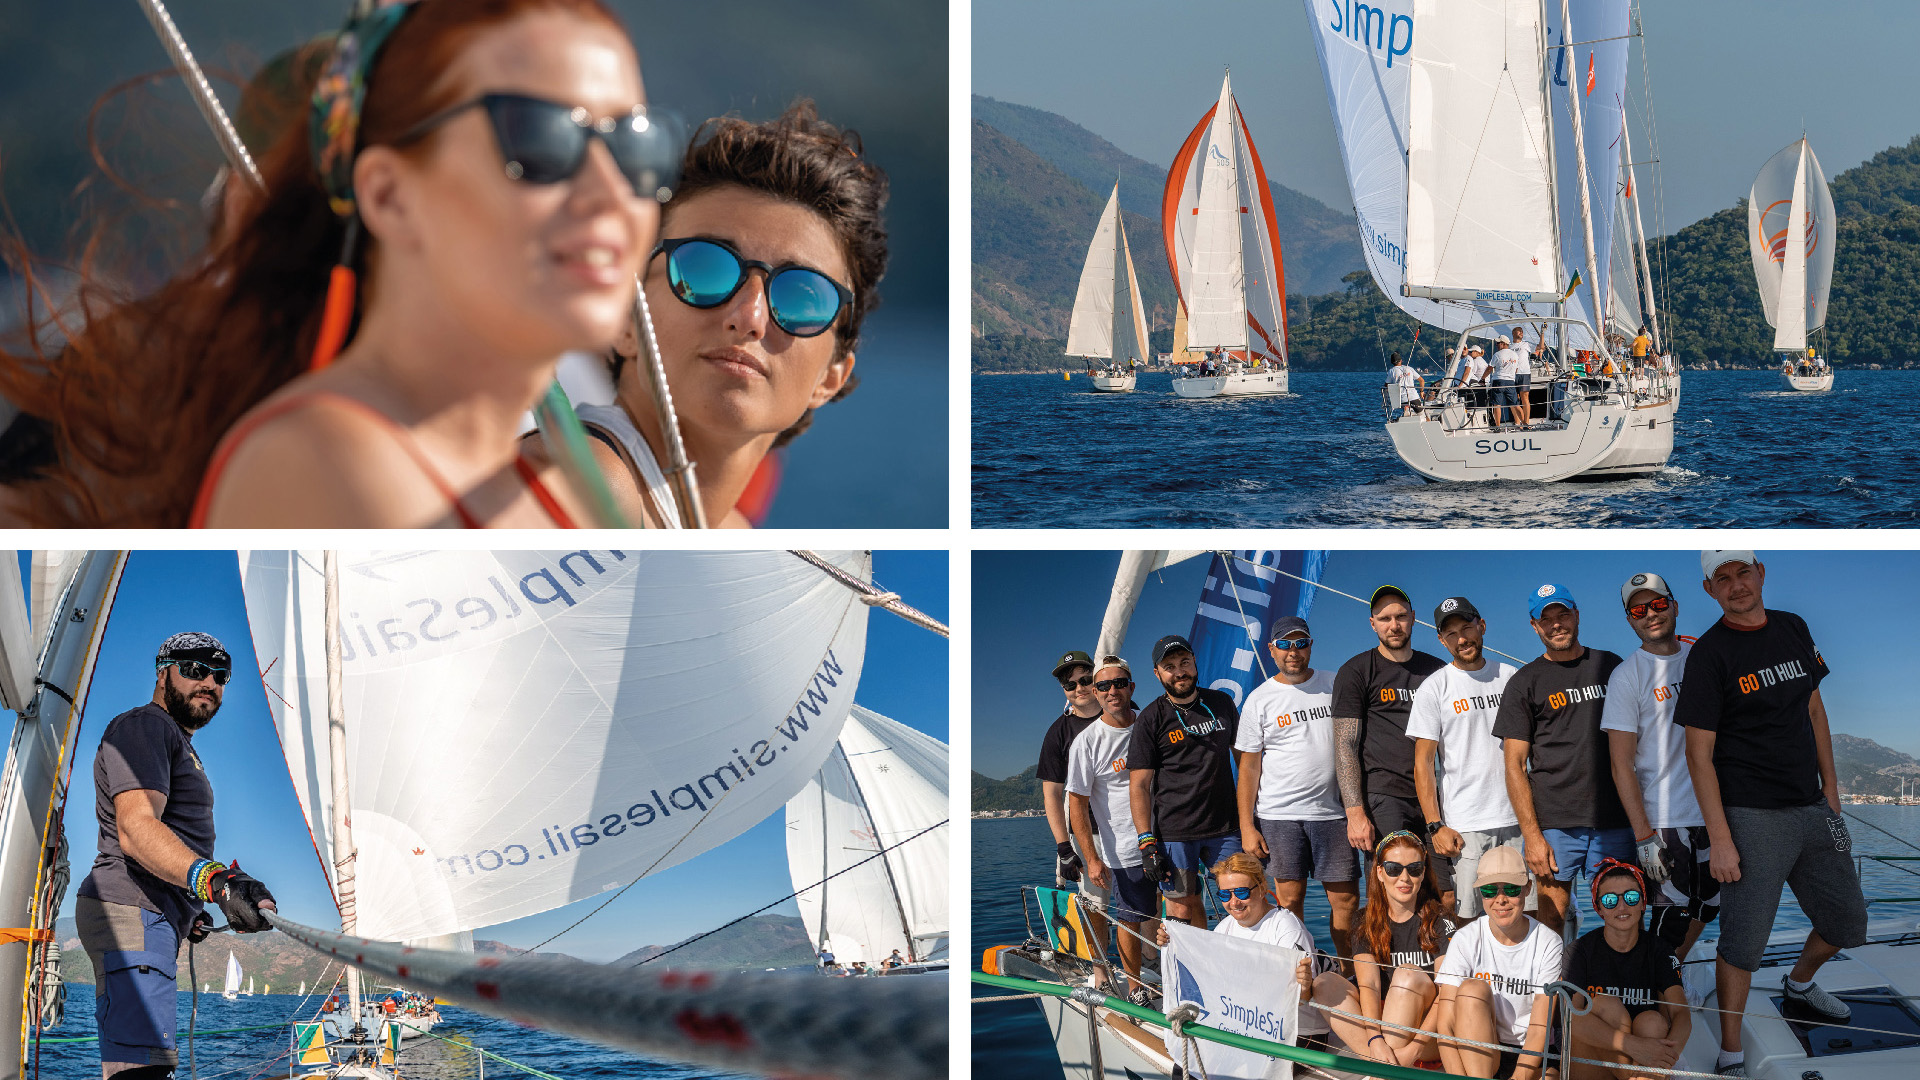 It's amazing SimpleSail yacht charter